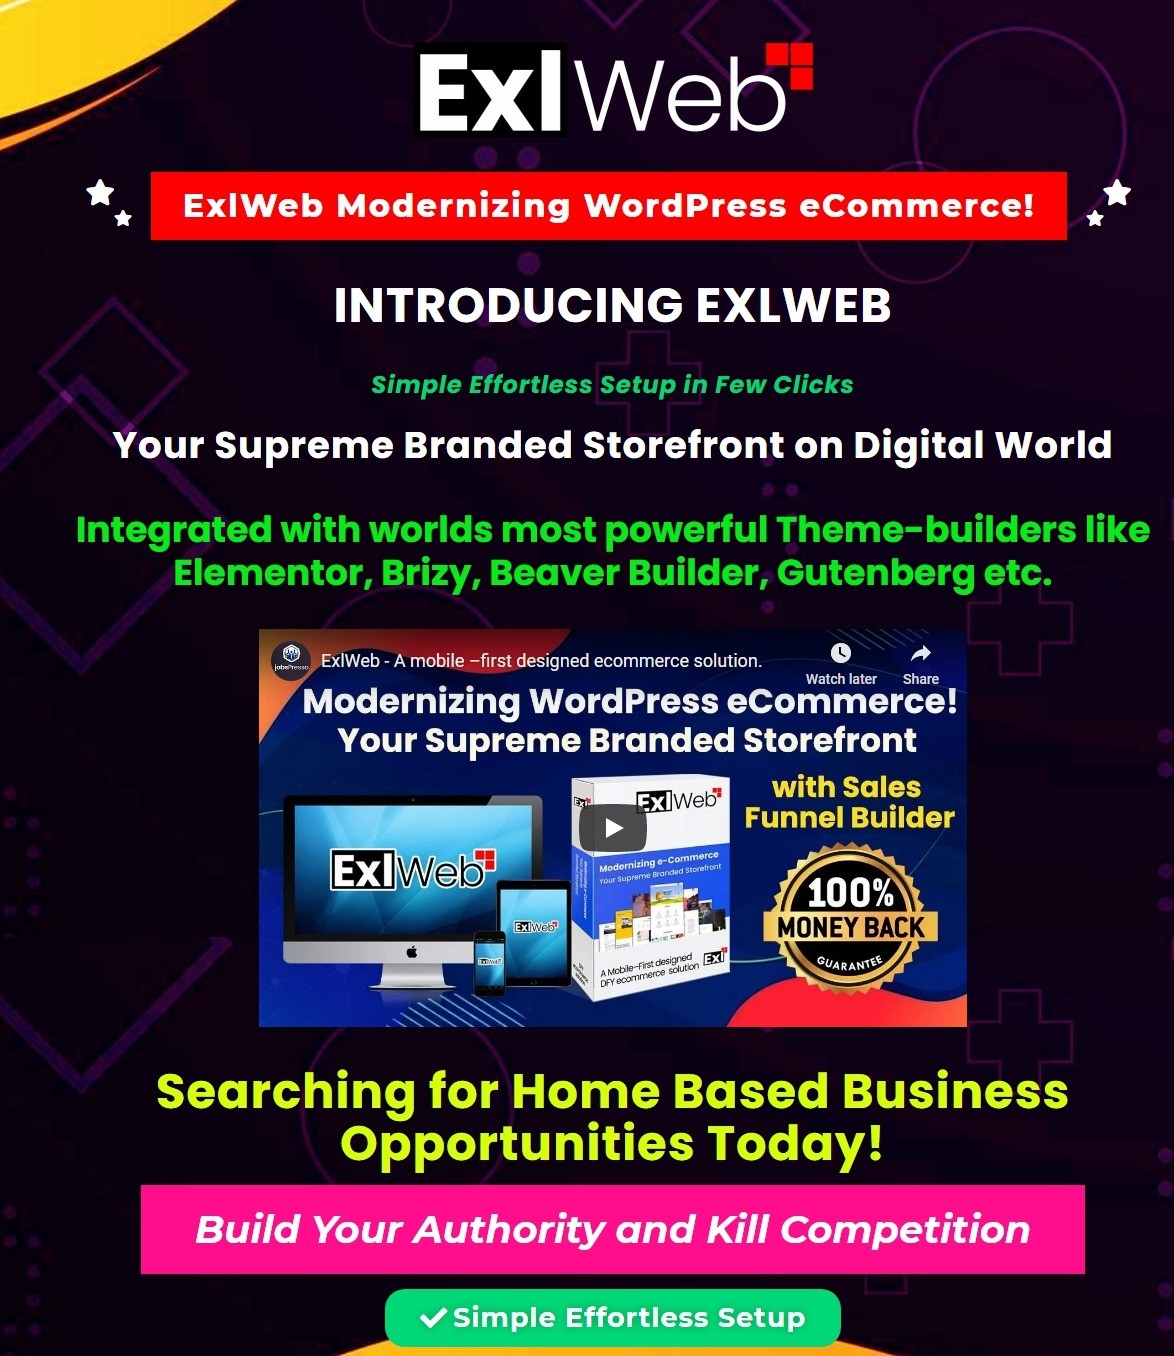 ExlWeb Review: It is a cloud based one click chat order ecommerce store